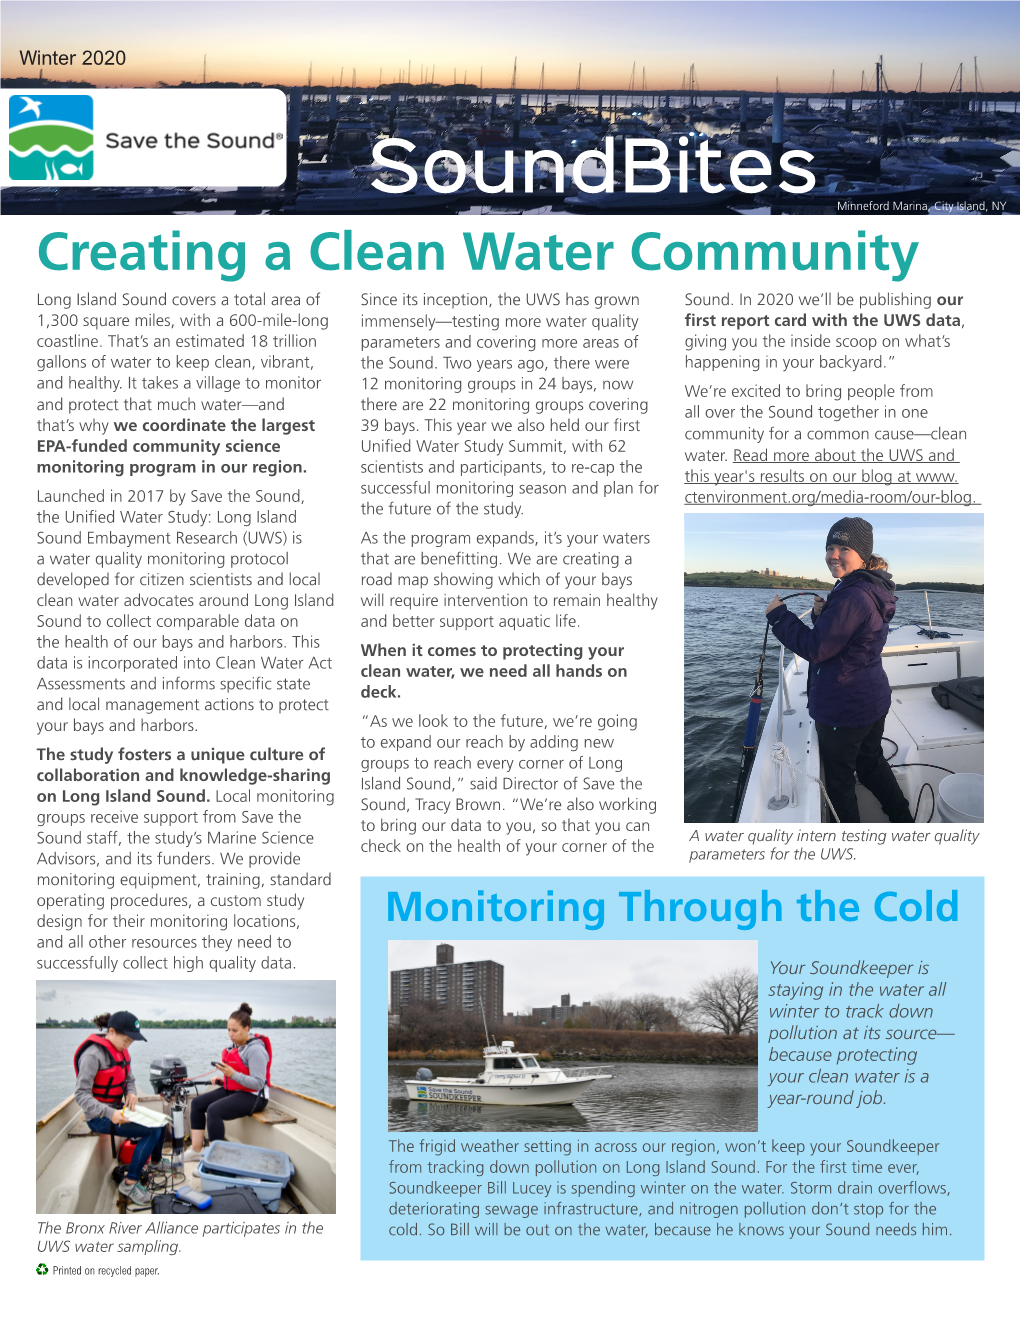 Soundbites Minneford Marina, City Island, NY Creating a Clean Water Community Long Island Sound Covers a Total Area of Since Its Inception, the UWS Has Grown Sound